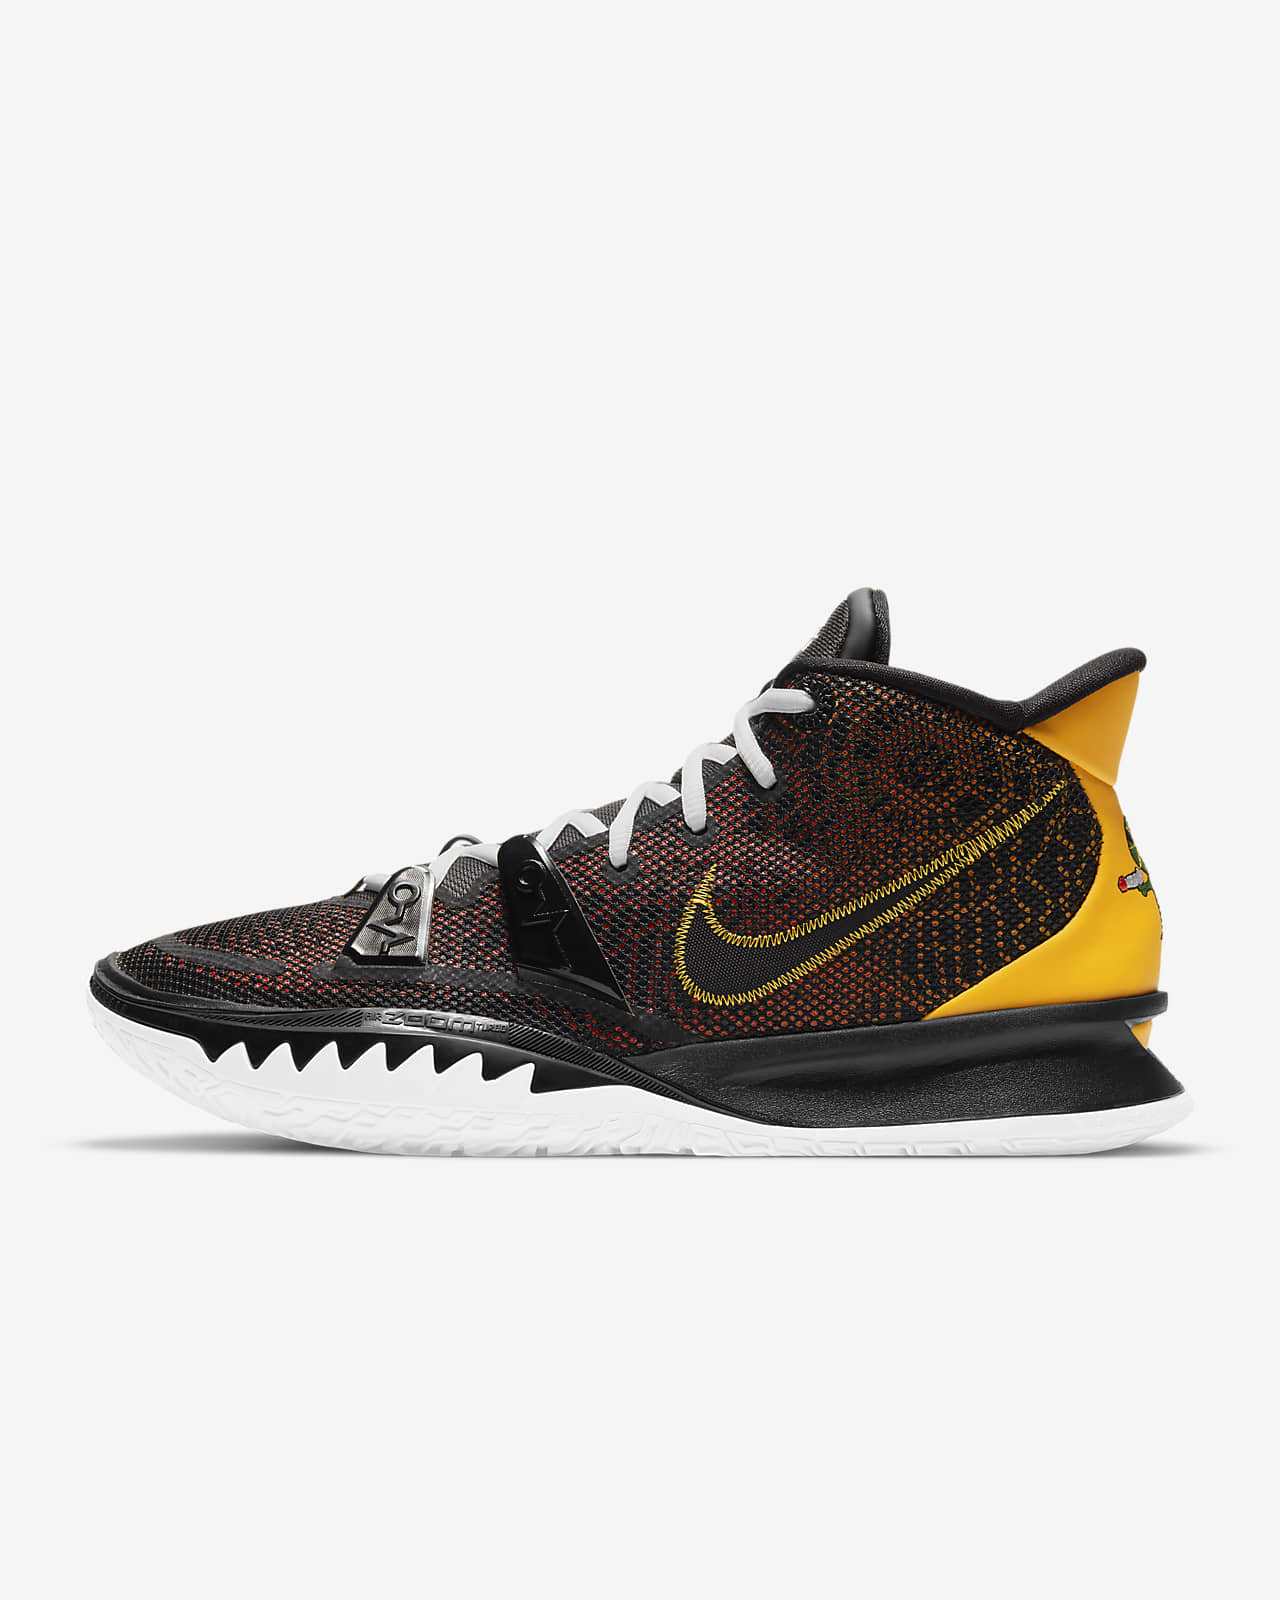 kyrie 7 release